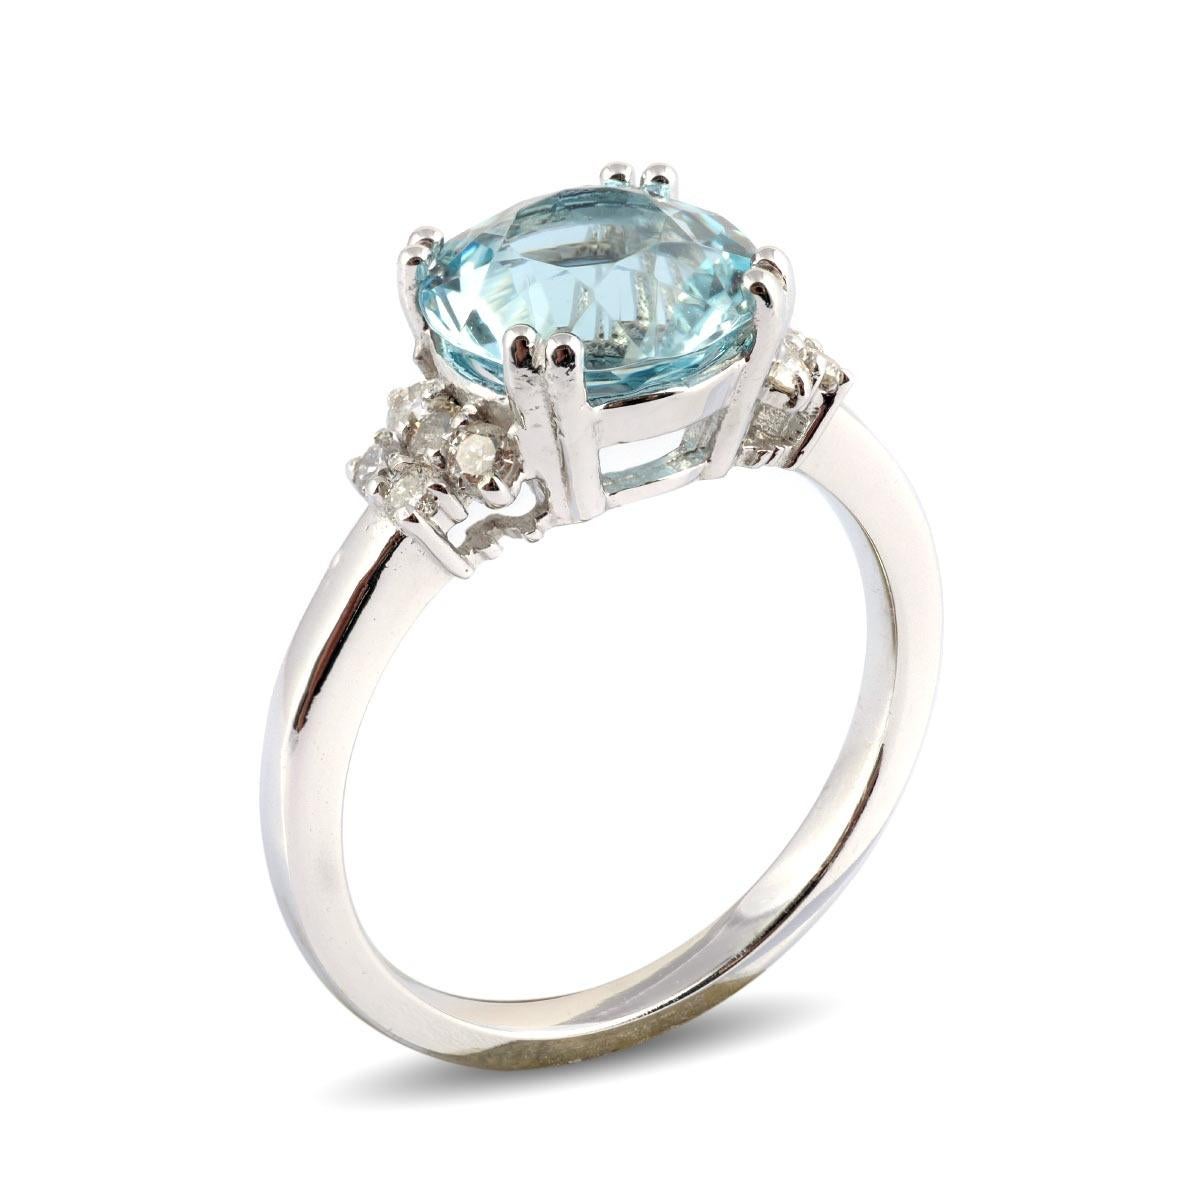 This exquisite ring showcases a round-cut, eye-clean Aquamarine weighing 2.40 carats, renowned for its cool and soothing blue tones. Its versatility makes it a perfect choice to add a pop of color to any white ensemble. The elegant design of the